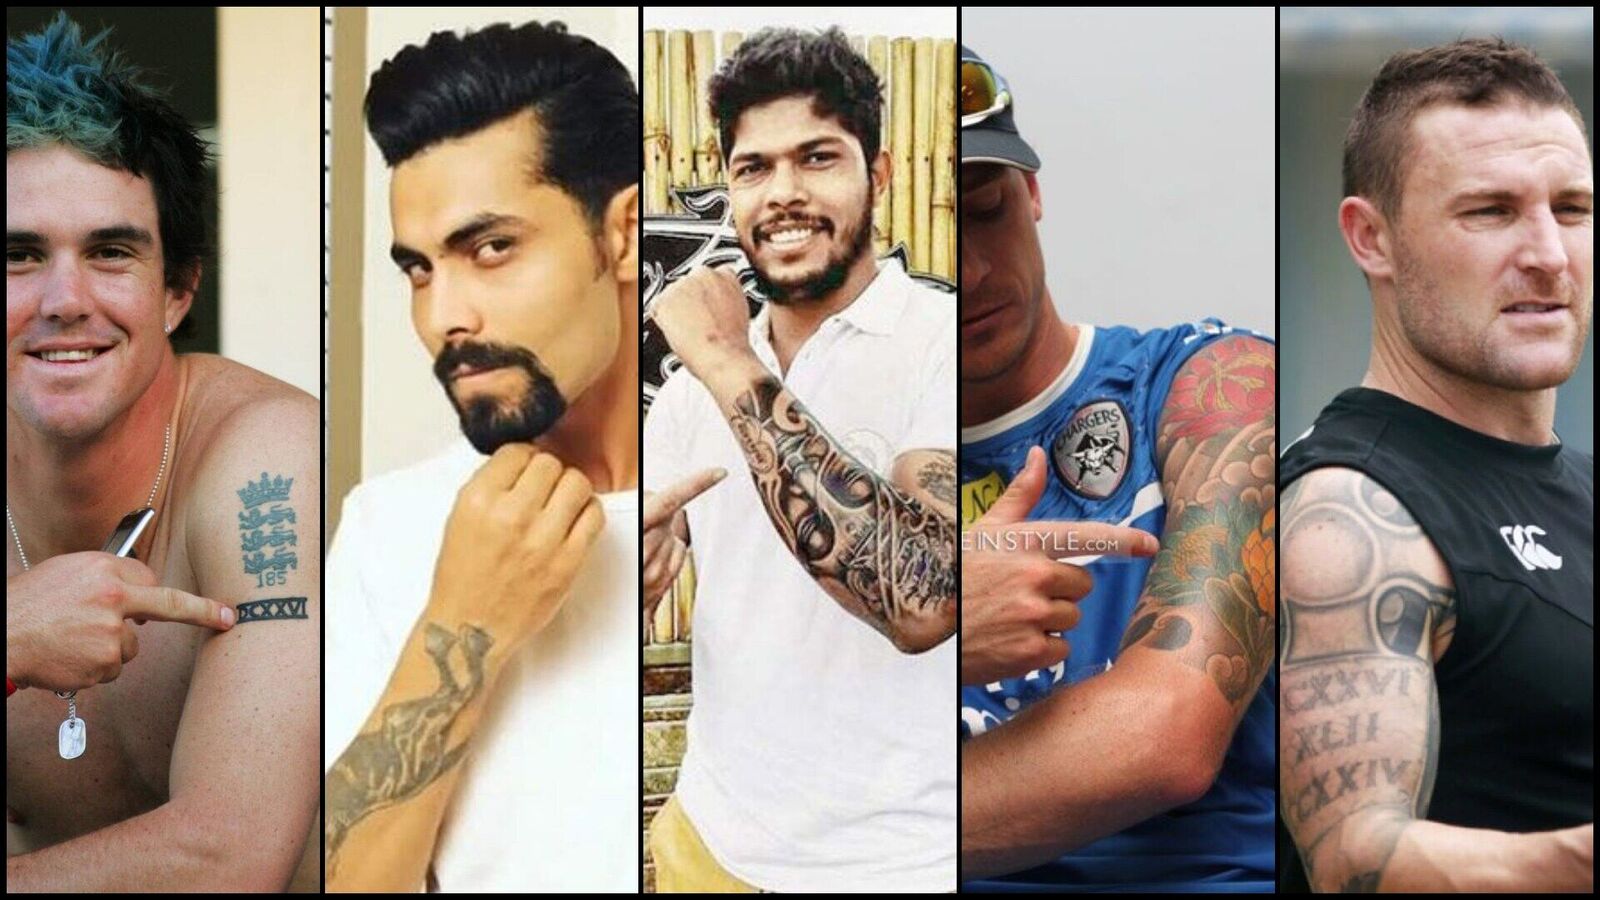 Top Cricketer Quote Tattoos To Get: Finding Inspiration In Ink - Lizard's  Skin Tattoos